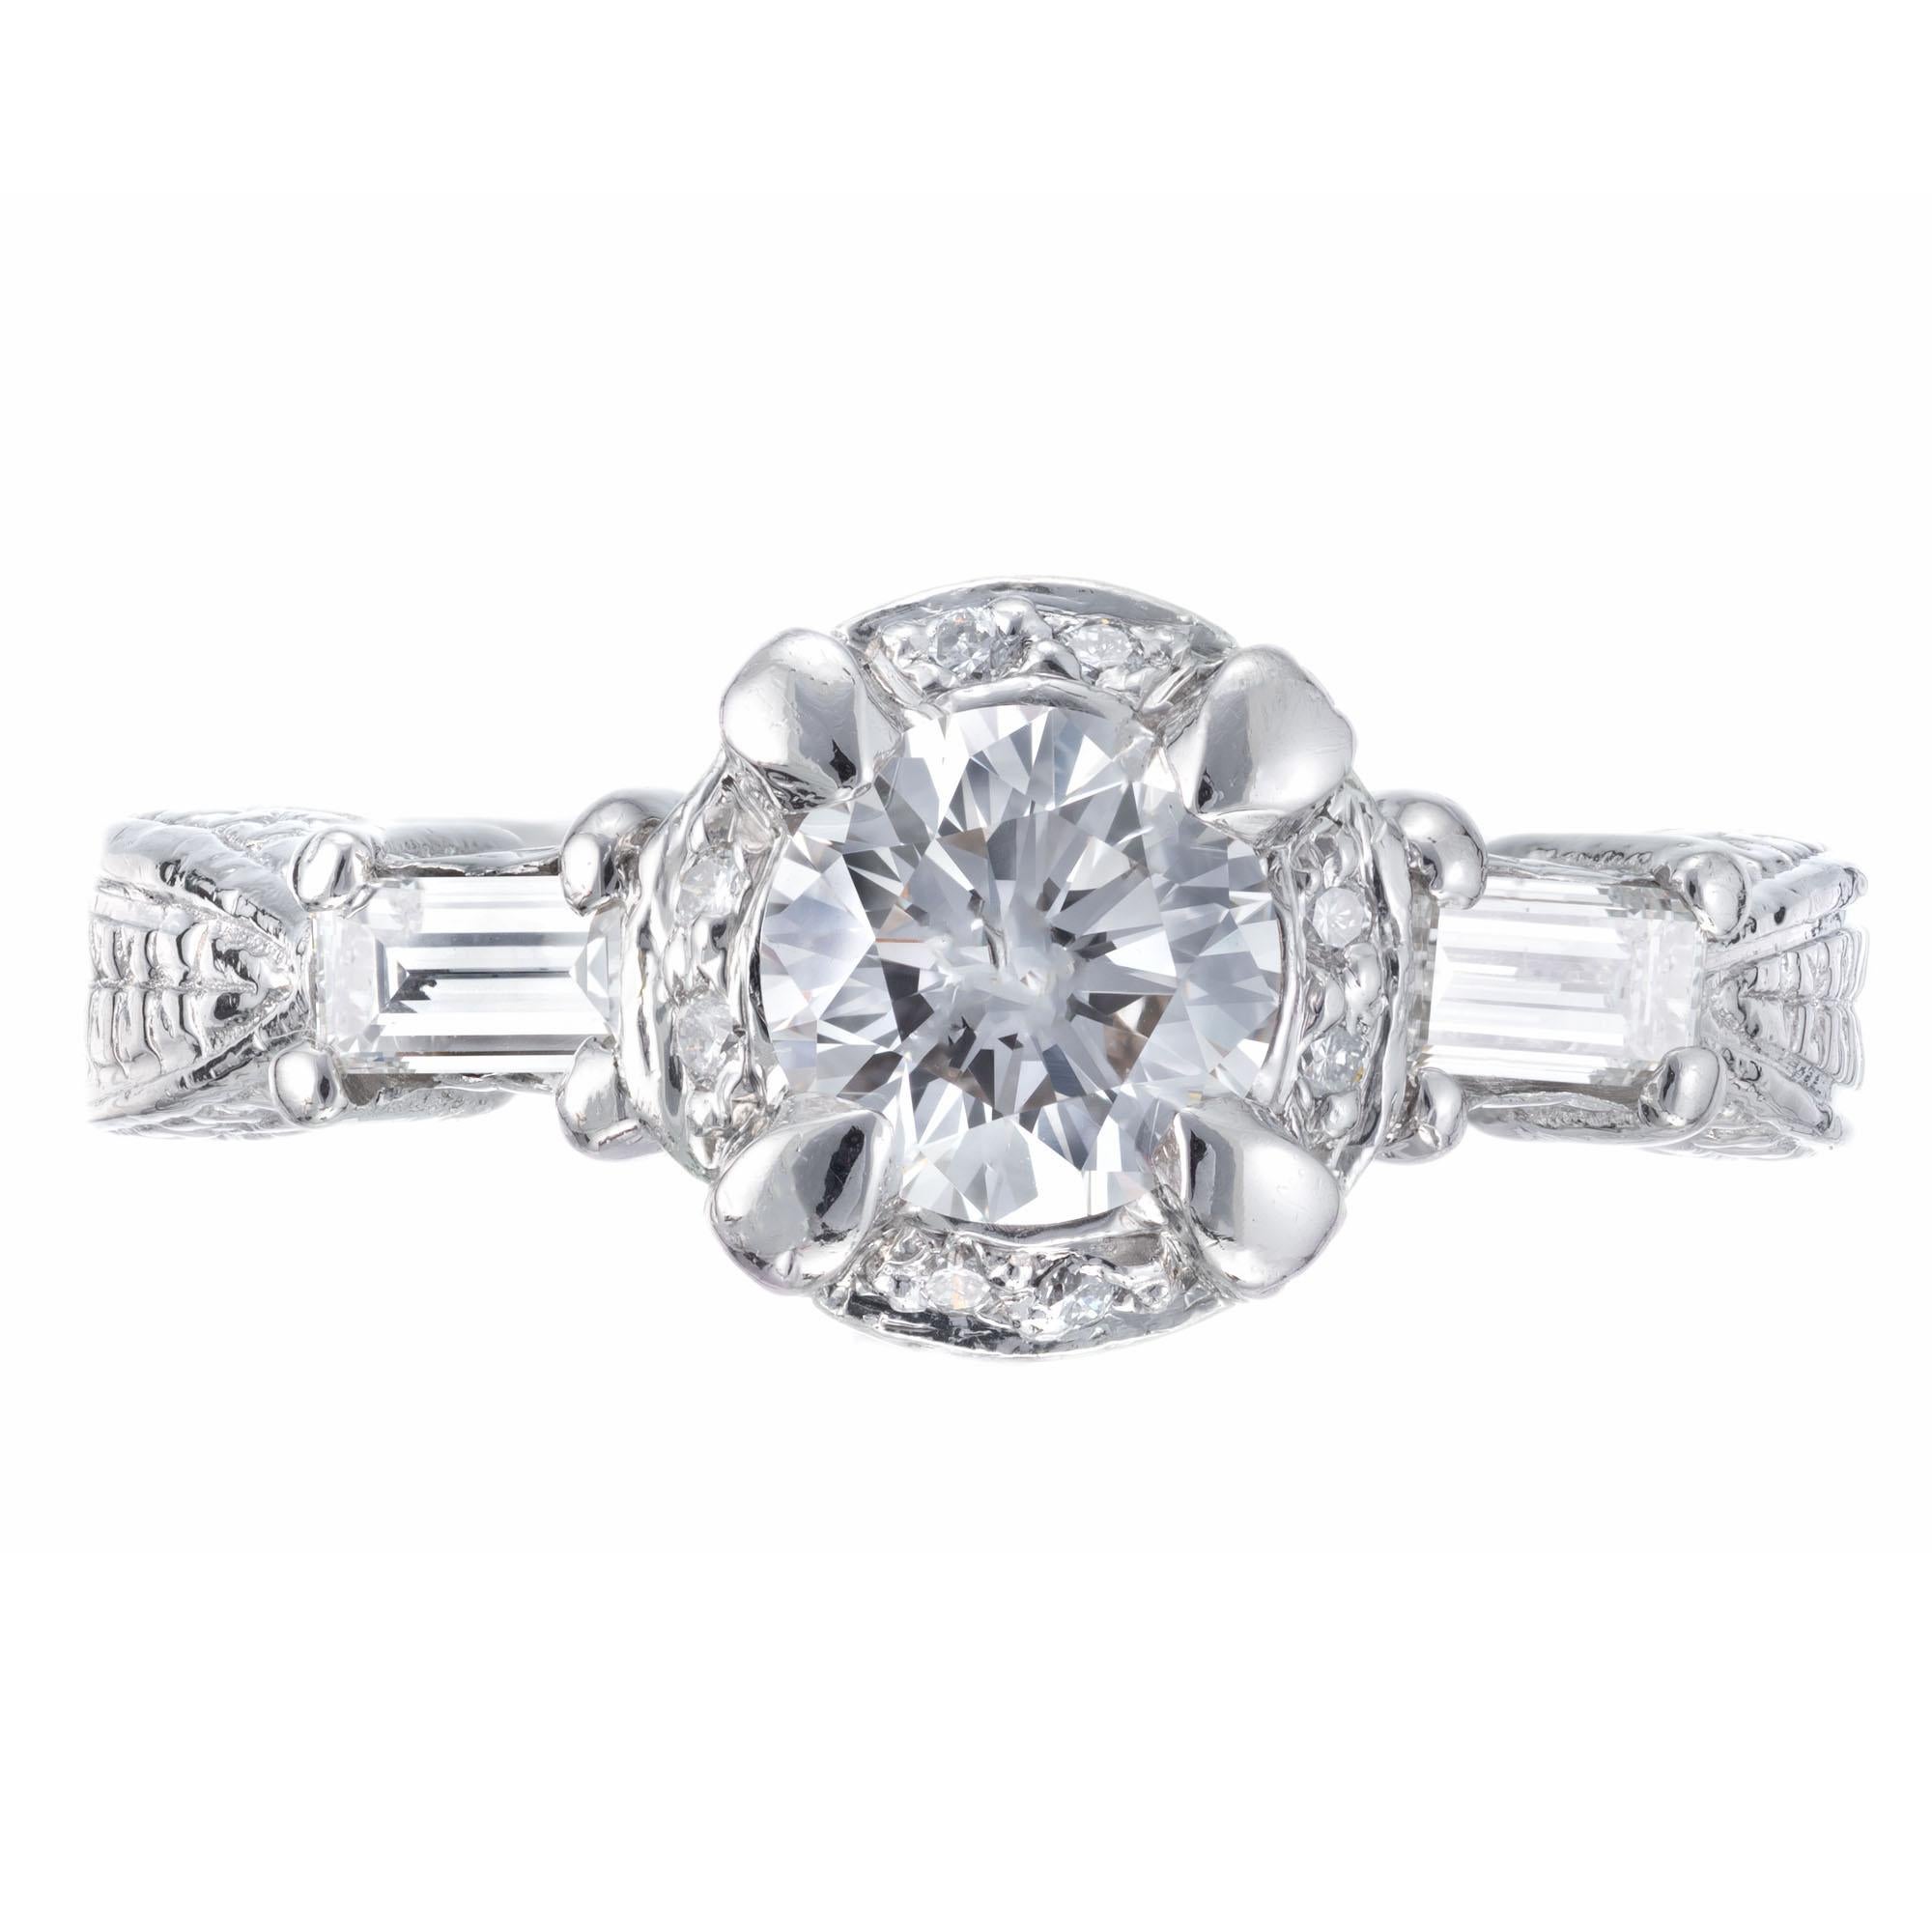 Round and bagguette diamond ring. Round center stone set in platinum with 2 baguette side diamonds and 16 round accent diamonds. 

1 Center diamond approx. total weight .75cts, G, VS2
2 baguette diamonds, approx. total weight .18cts, G, VS
16 round